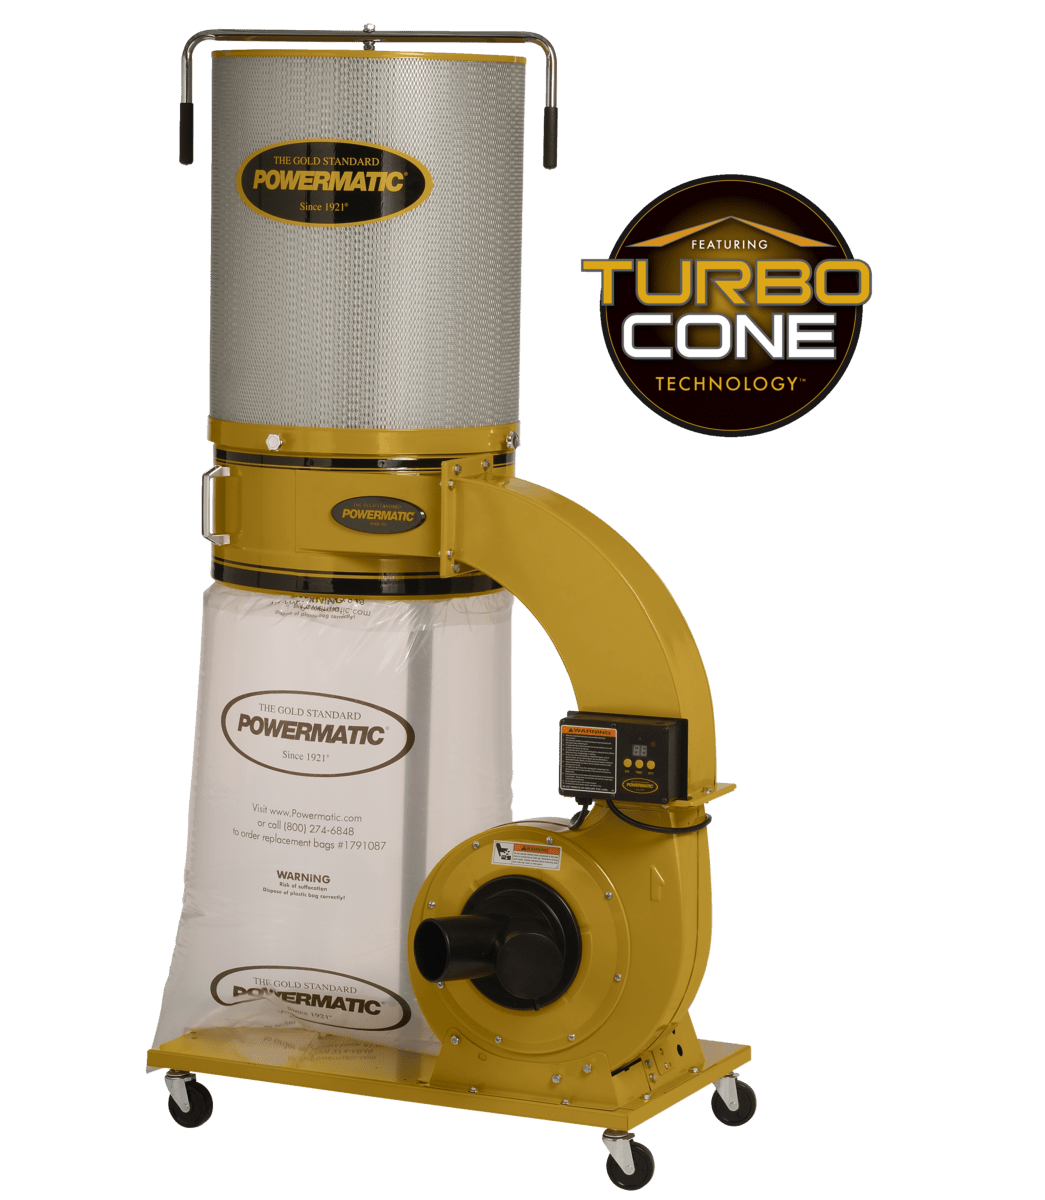 PM1300TX-CK Dust Collector, 1.75HP 1PH 115/230V, 2-Micron Canister Kit - Powermatic